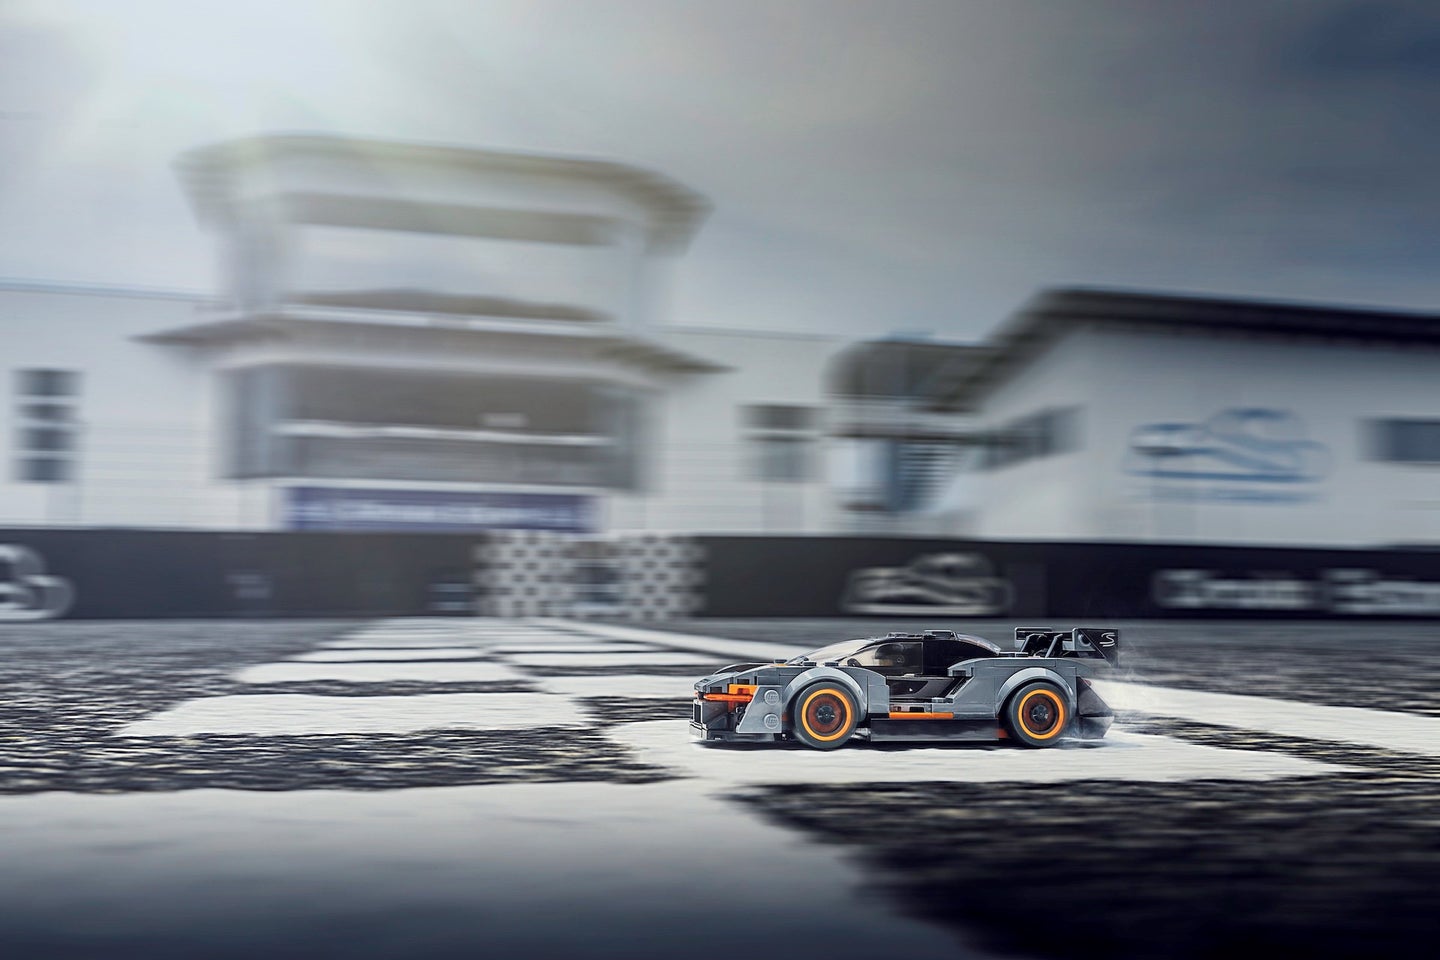 New McLaren Senna Lego Kit Is 50,000 Times Cheaper Than the Real Thing and Almost as Cool